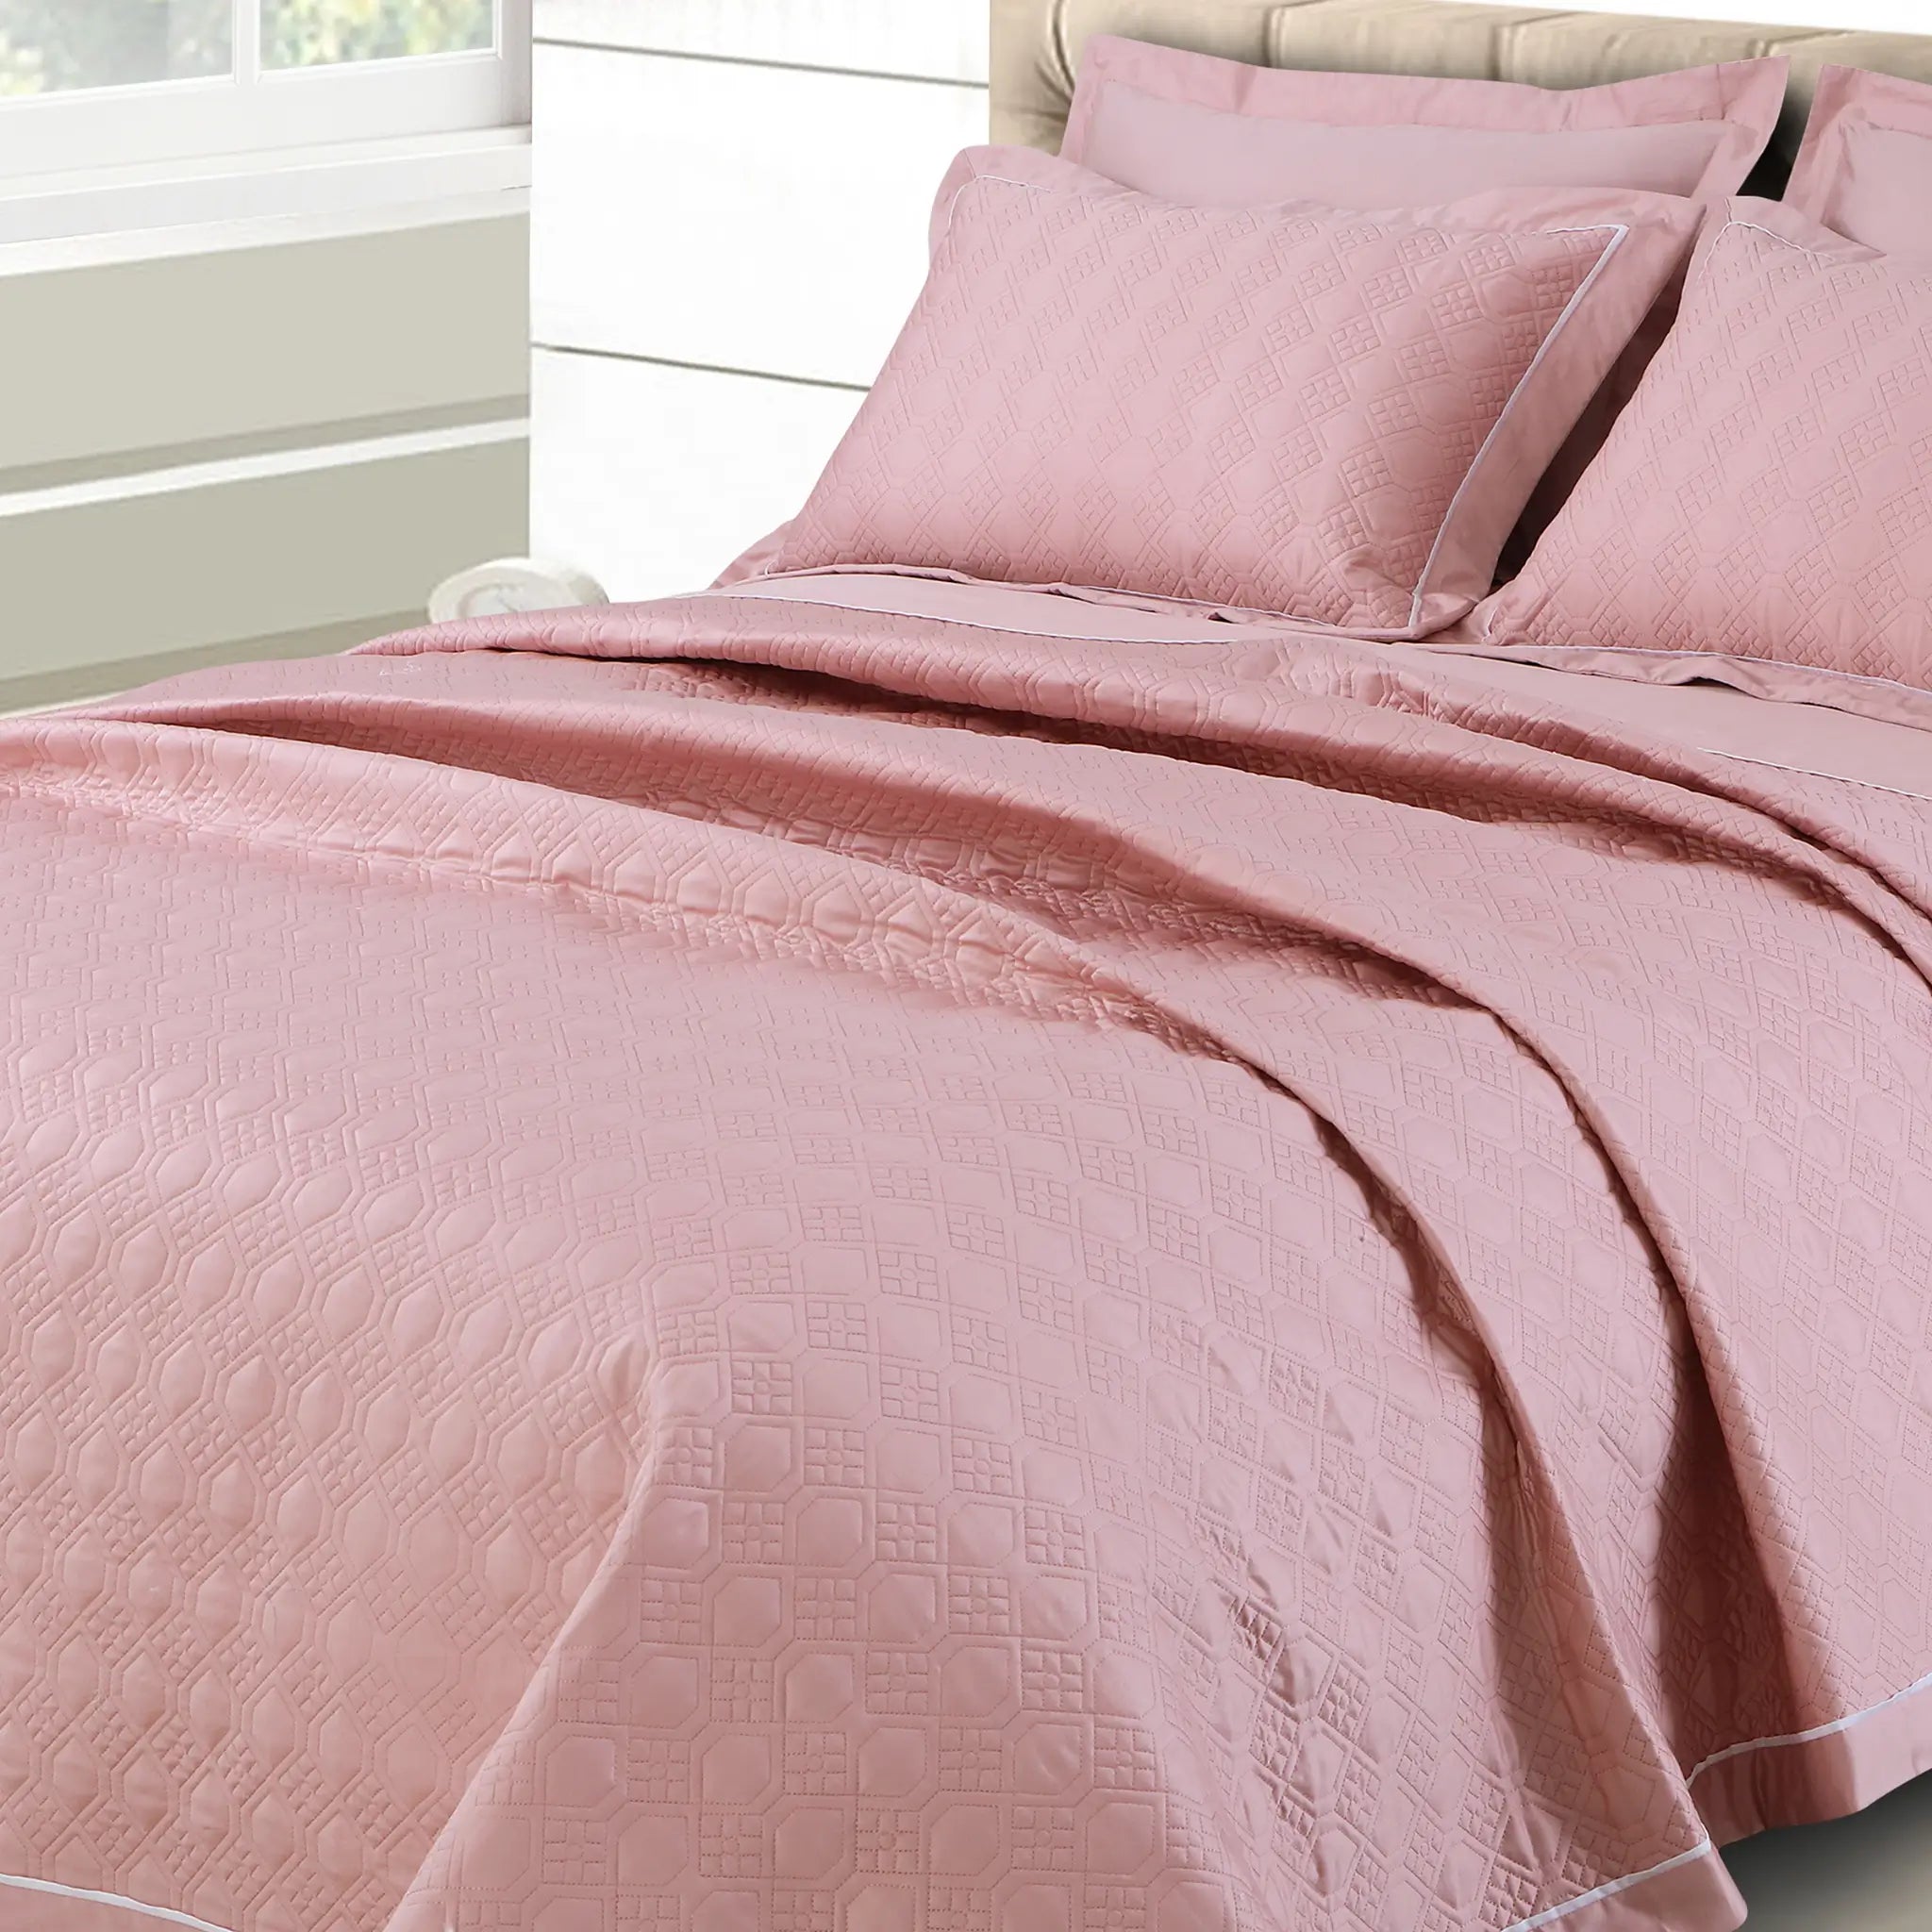 Malako Kairo 500 TC Rose Pink Solid King Size 100% Cotton Quilted Bed Cover/Embroidered Bed Sheet Set - MALAKO